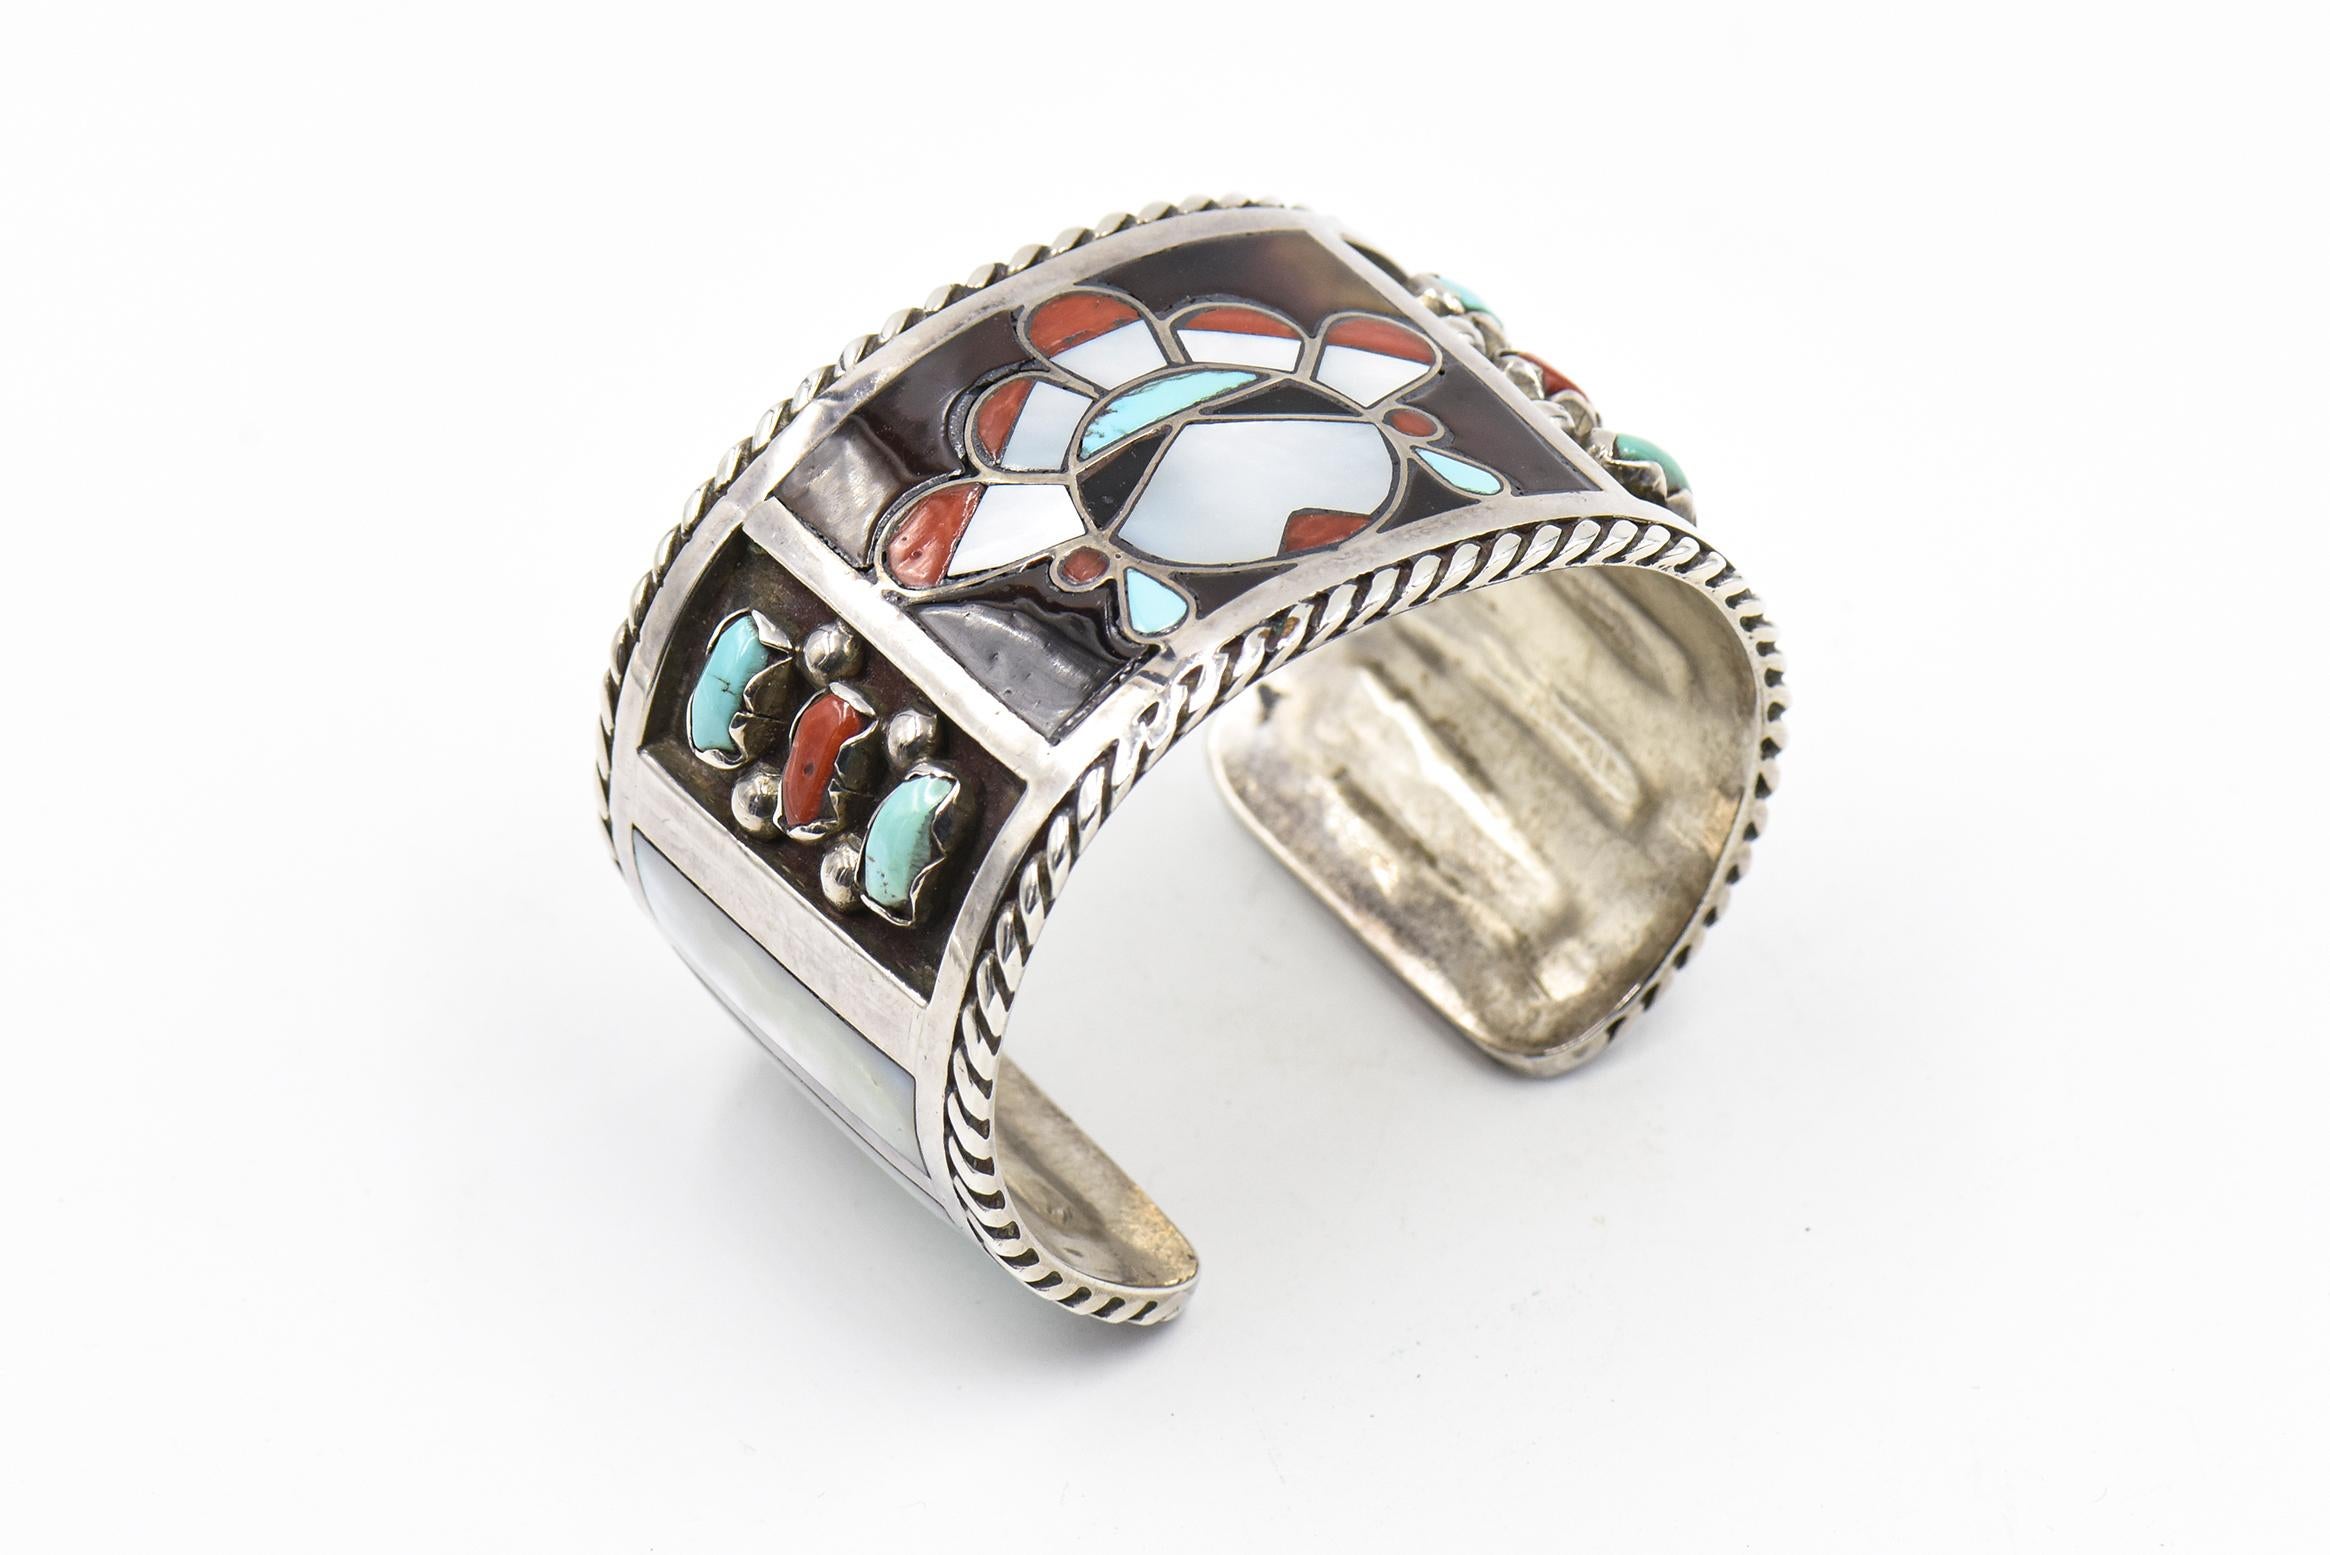 This beautiful bracelet is by Zuni artists Filbert & Clara Gasper.  Circa 1960 - 1970.  The bracelet is sterling silver with inlay turquoise, mother of pearl and coral.  In the center is an inlaid face and on the sides there are additional bezel set